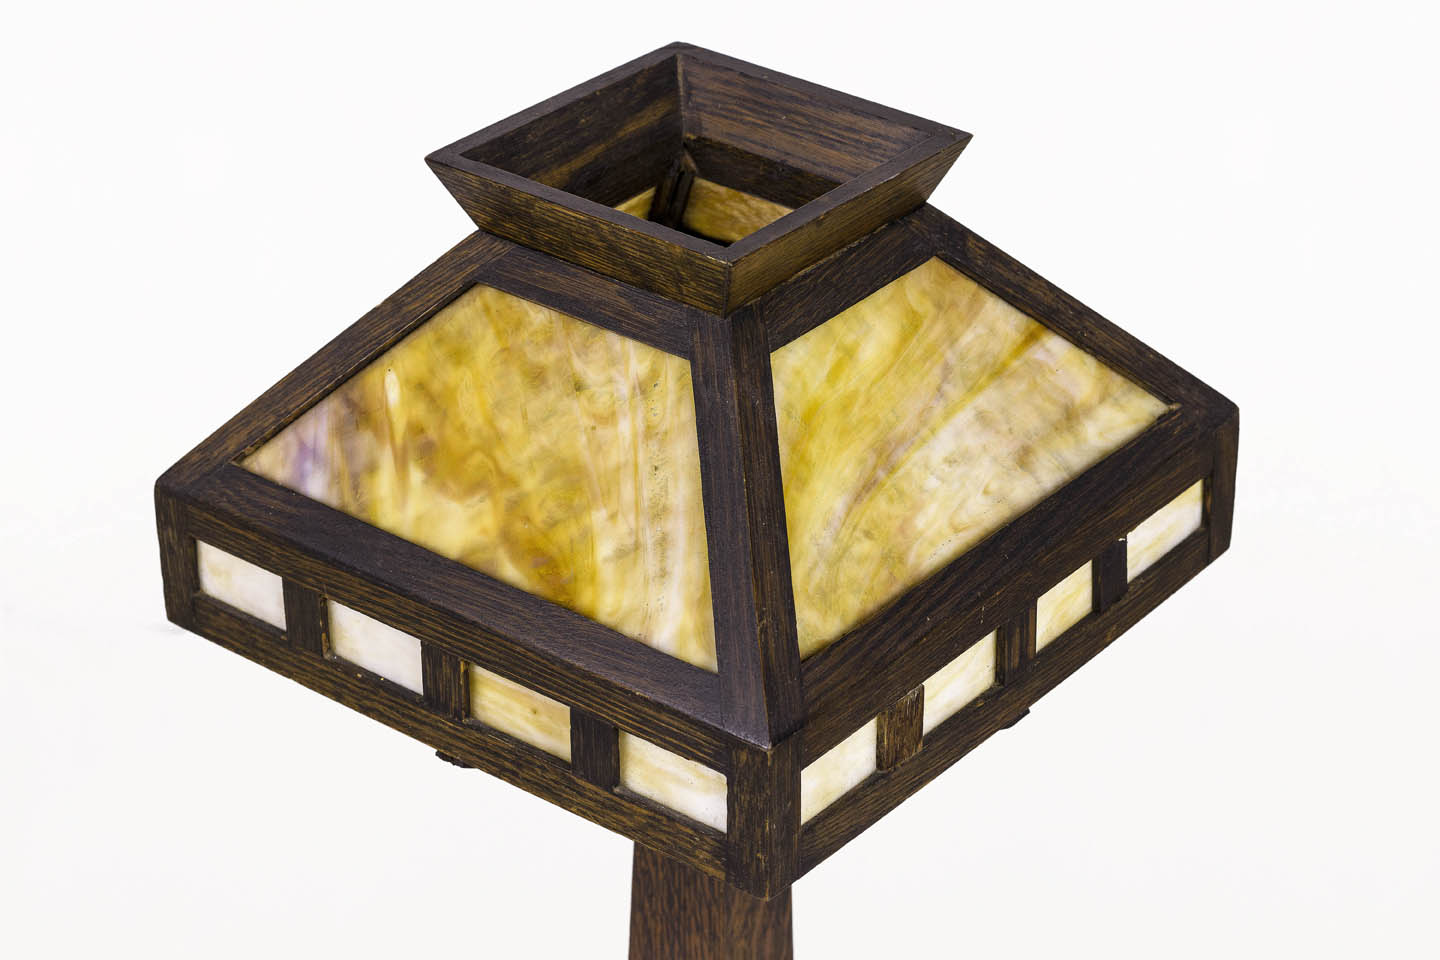 American Rustic Mission Style Oak Table, Mission Oak Table Lamp